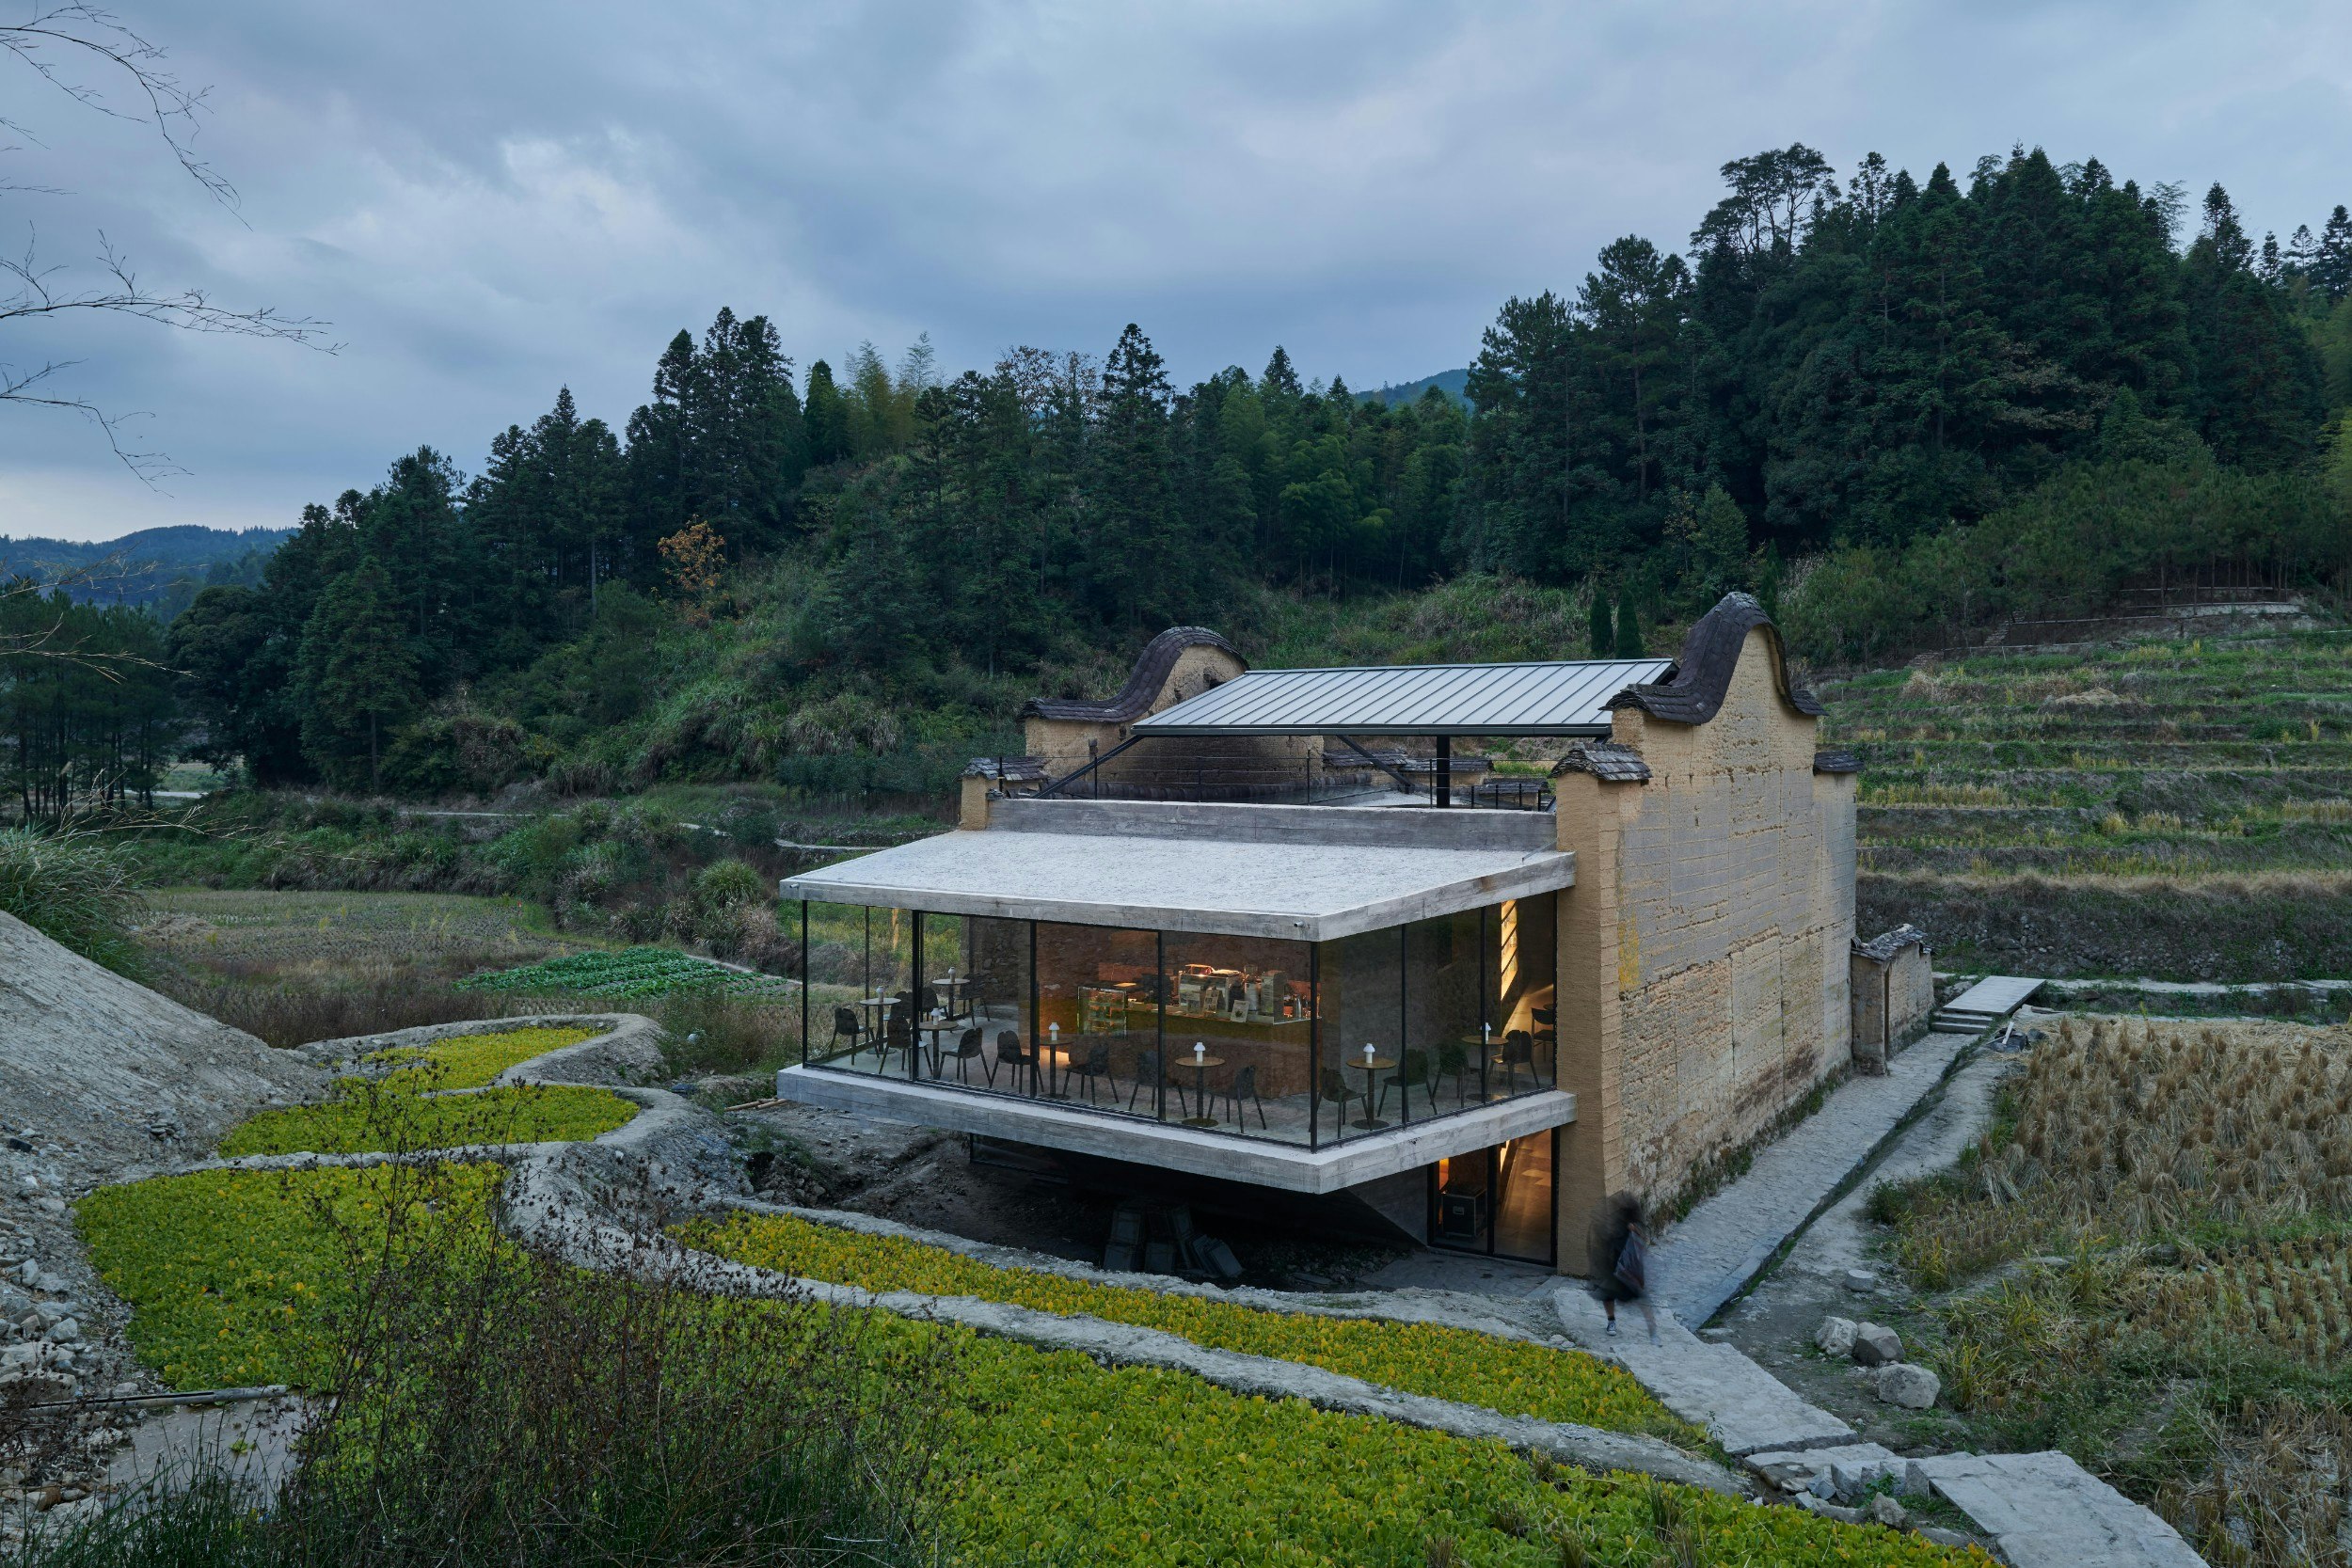 The Paddy Field Bookstore in China